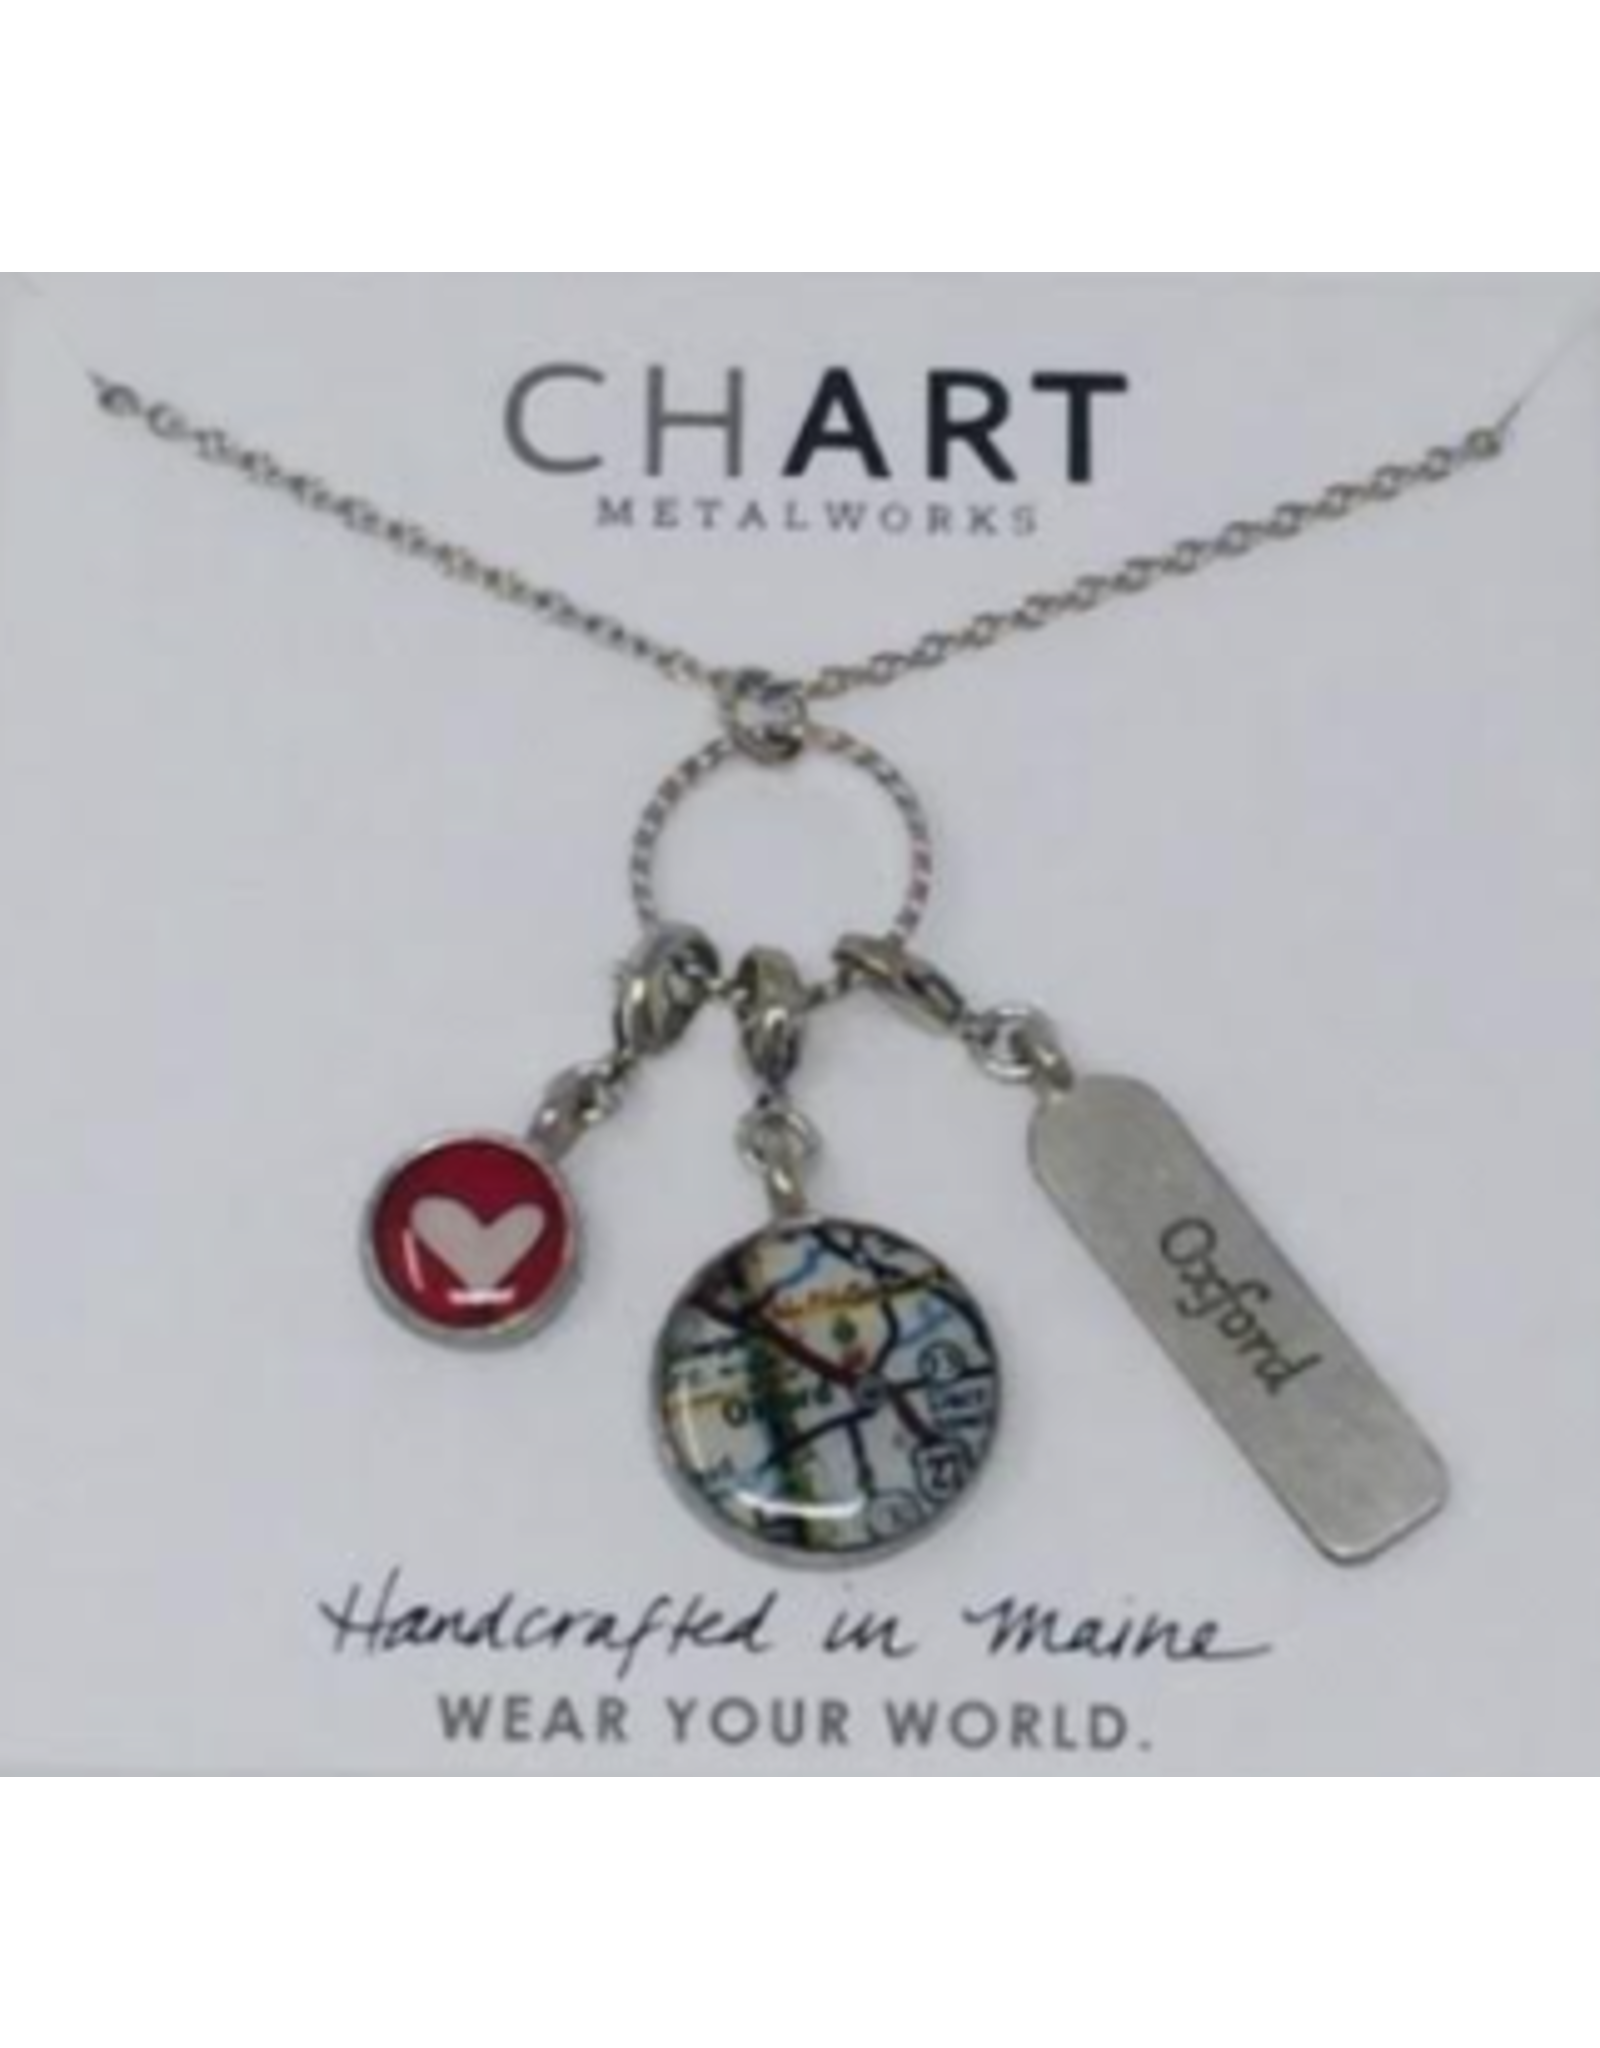 Chart Metalworks Chart Tripolo Necklace, Oxford Tag/Oxford Map/Heart Charm